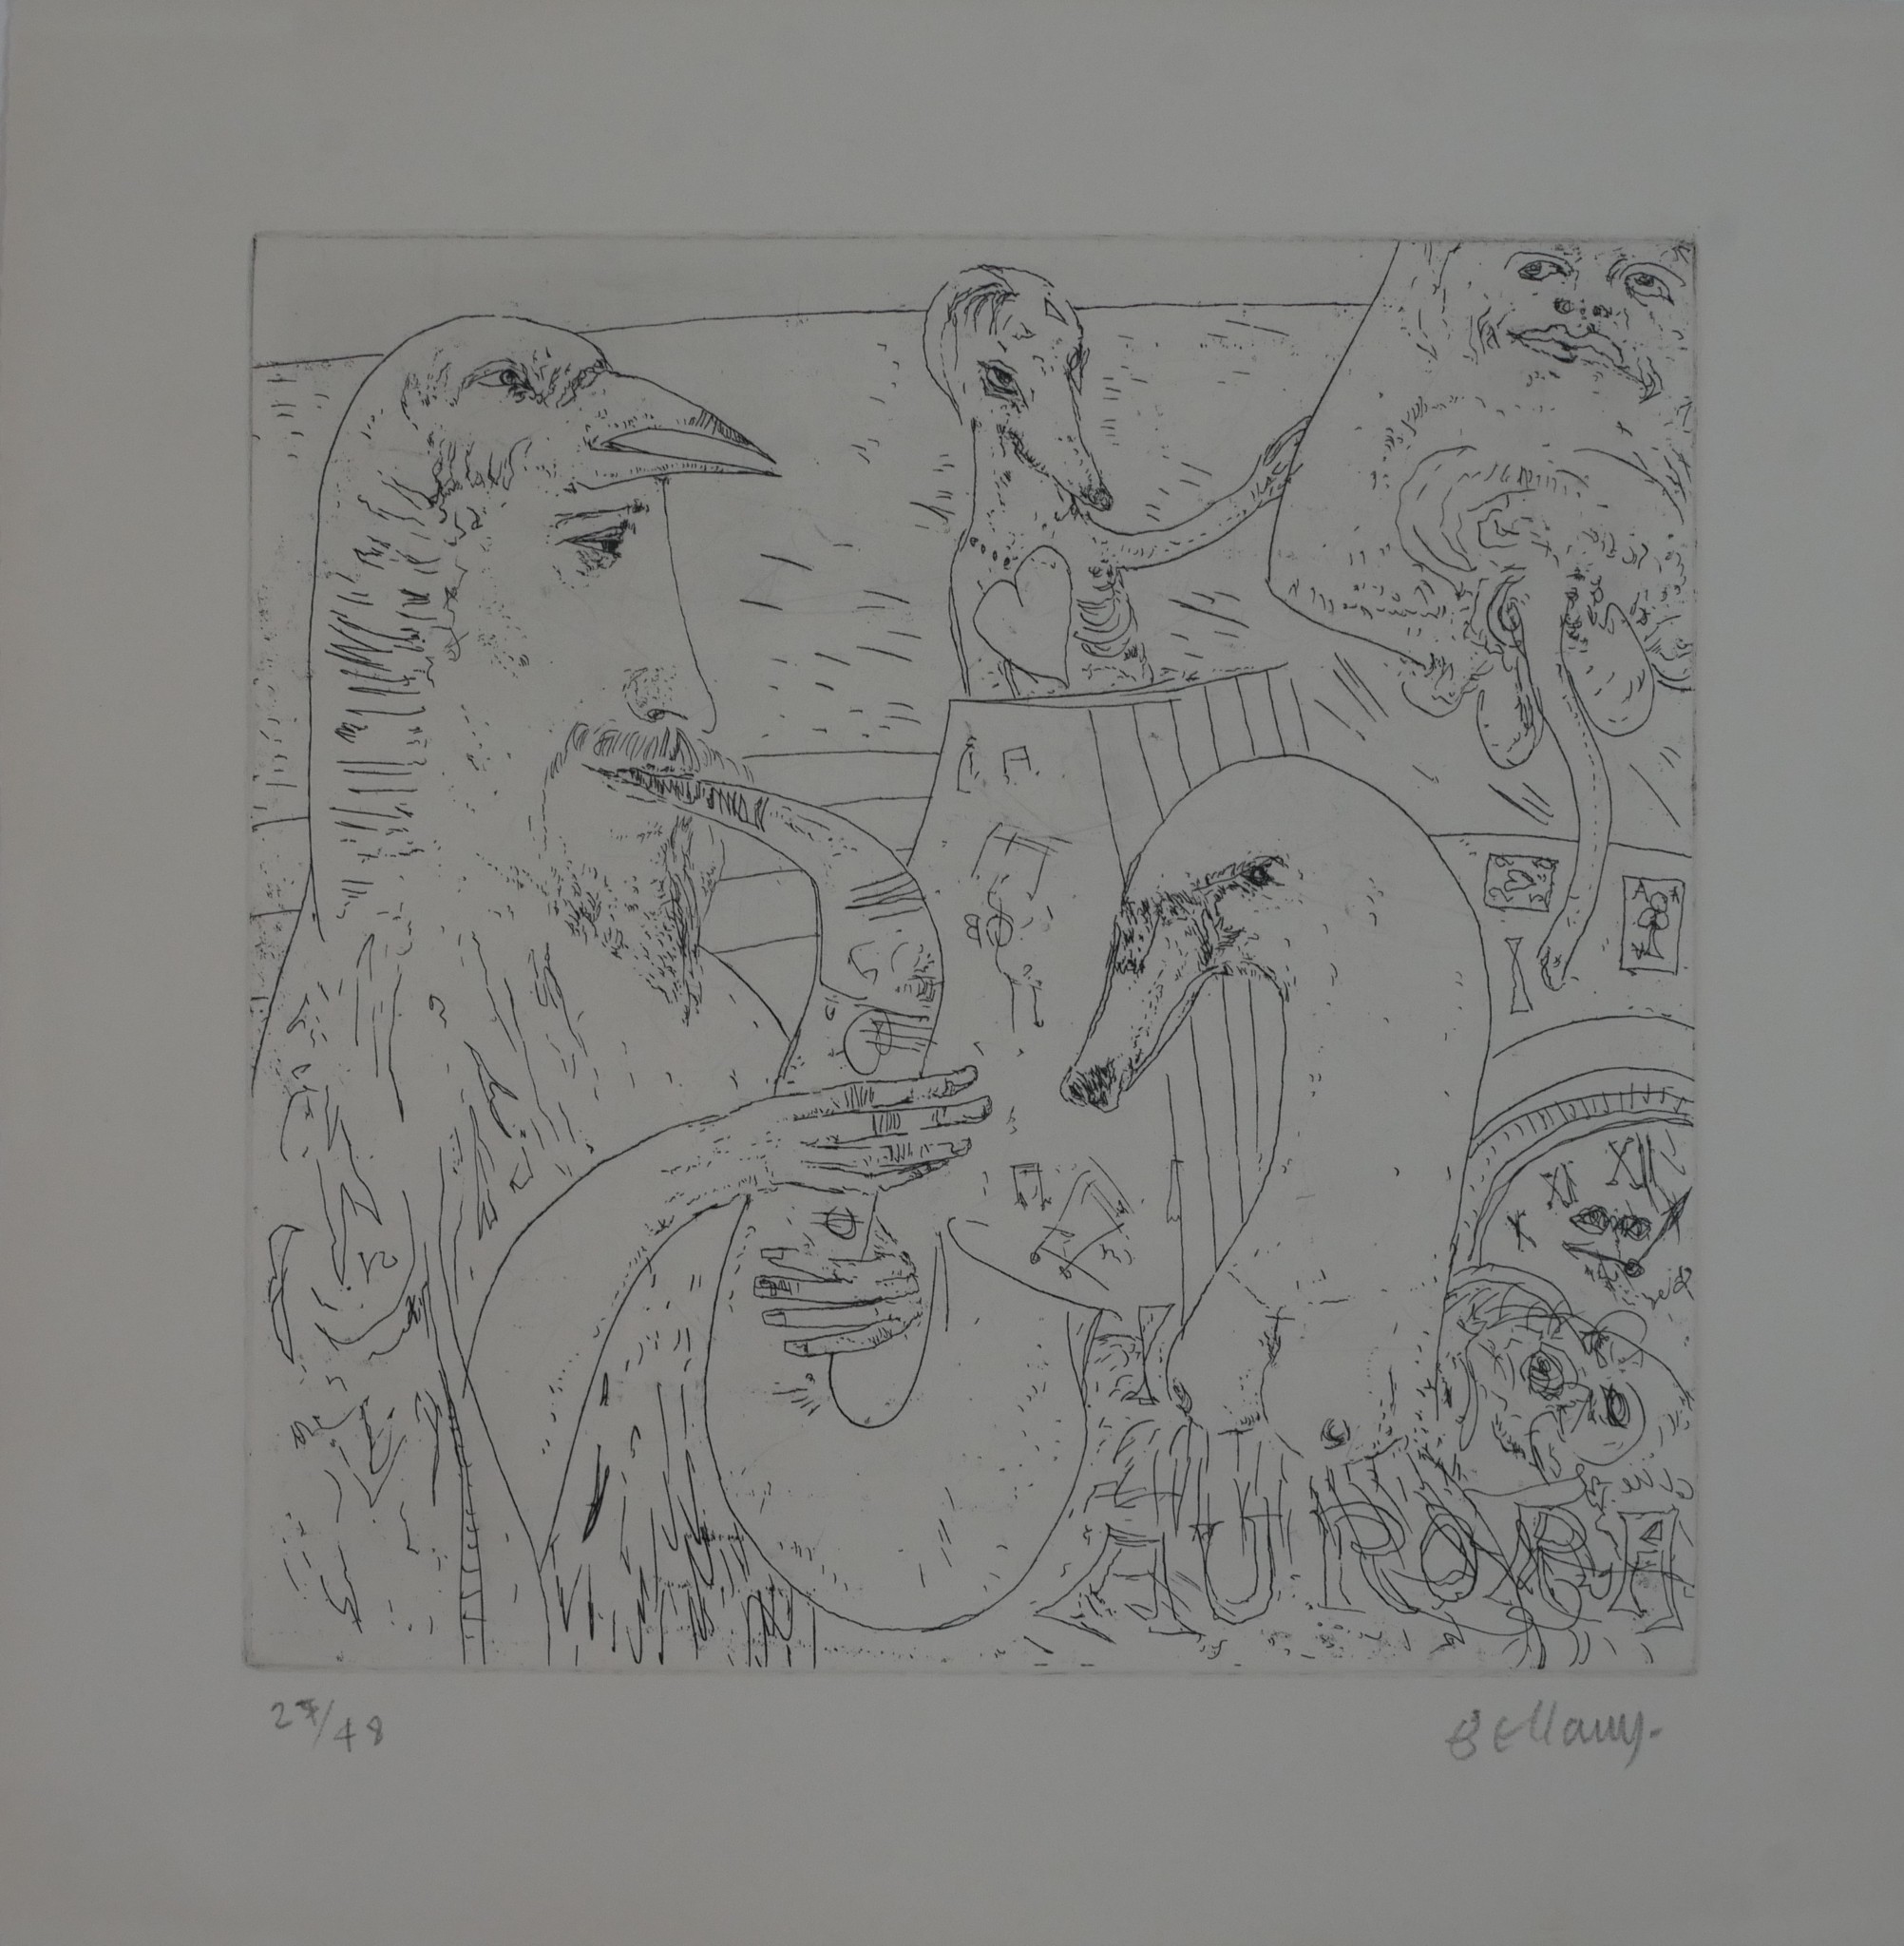 John Bellany (1942-2013), Serendipity, limited edition etching 27/48, signed and numbered in pencil,